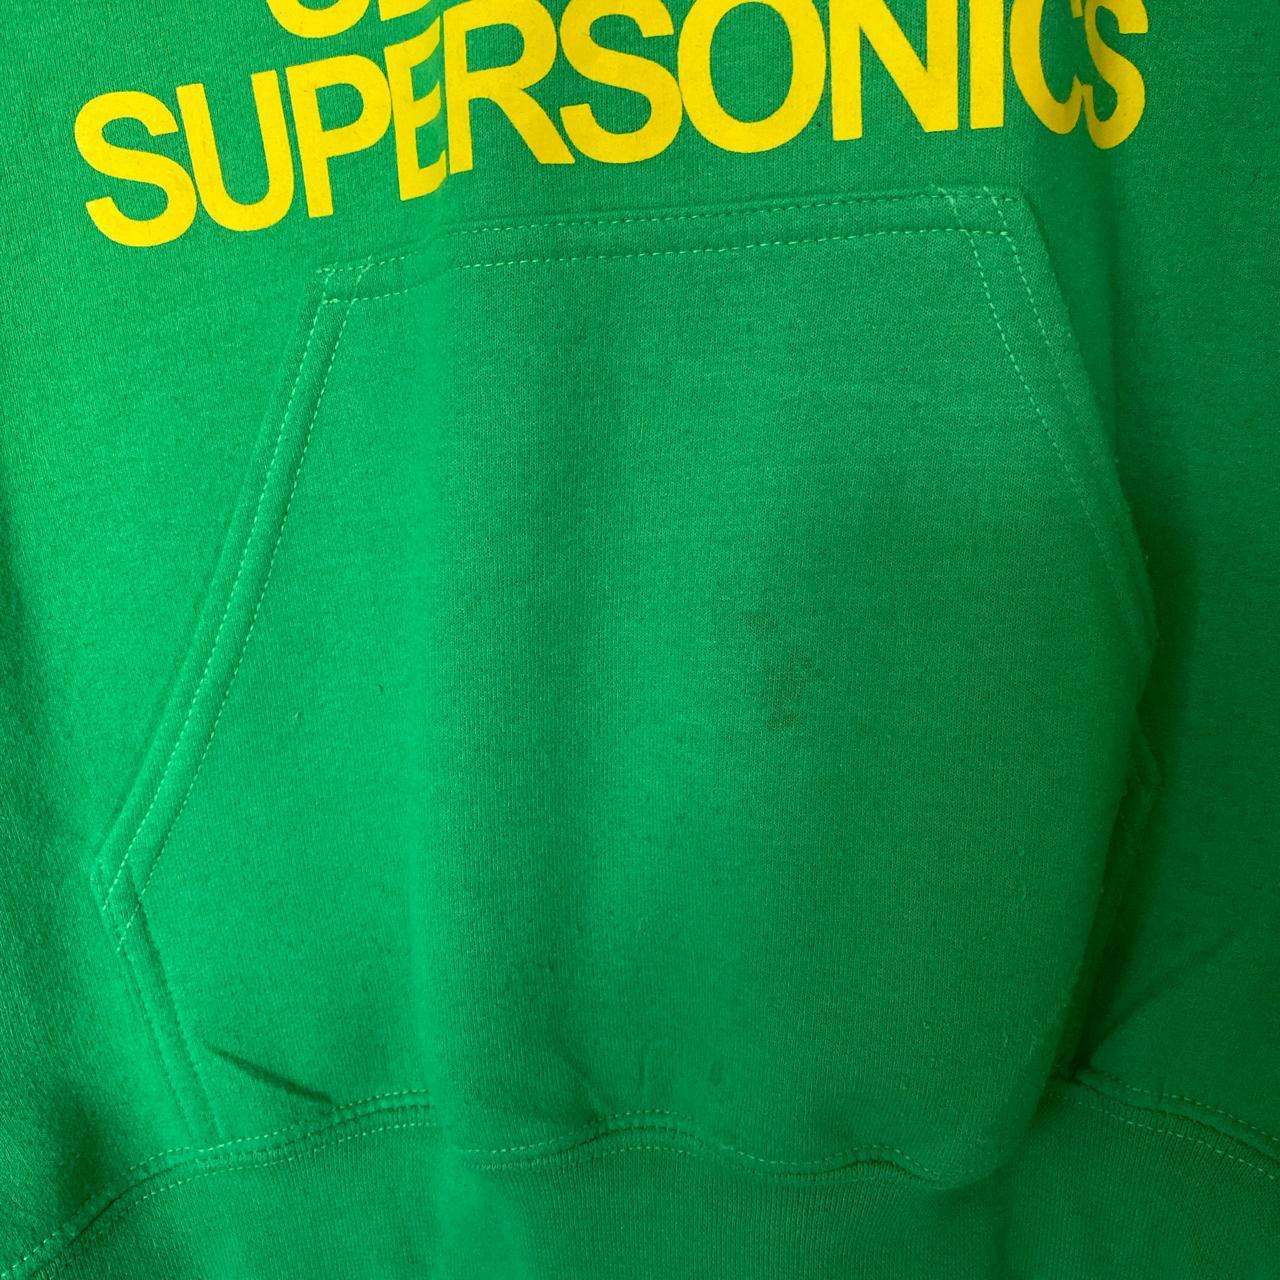 Seattle SuperSonics Green Skyline Youth Hoodie, Large (14-16)